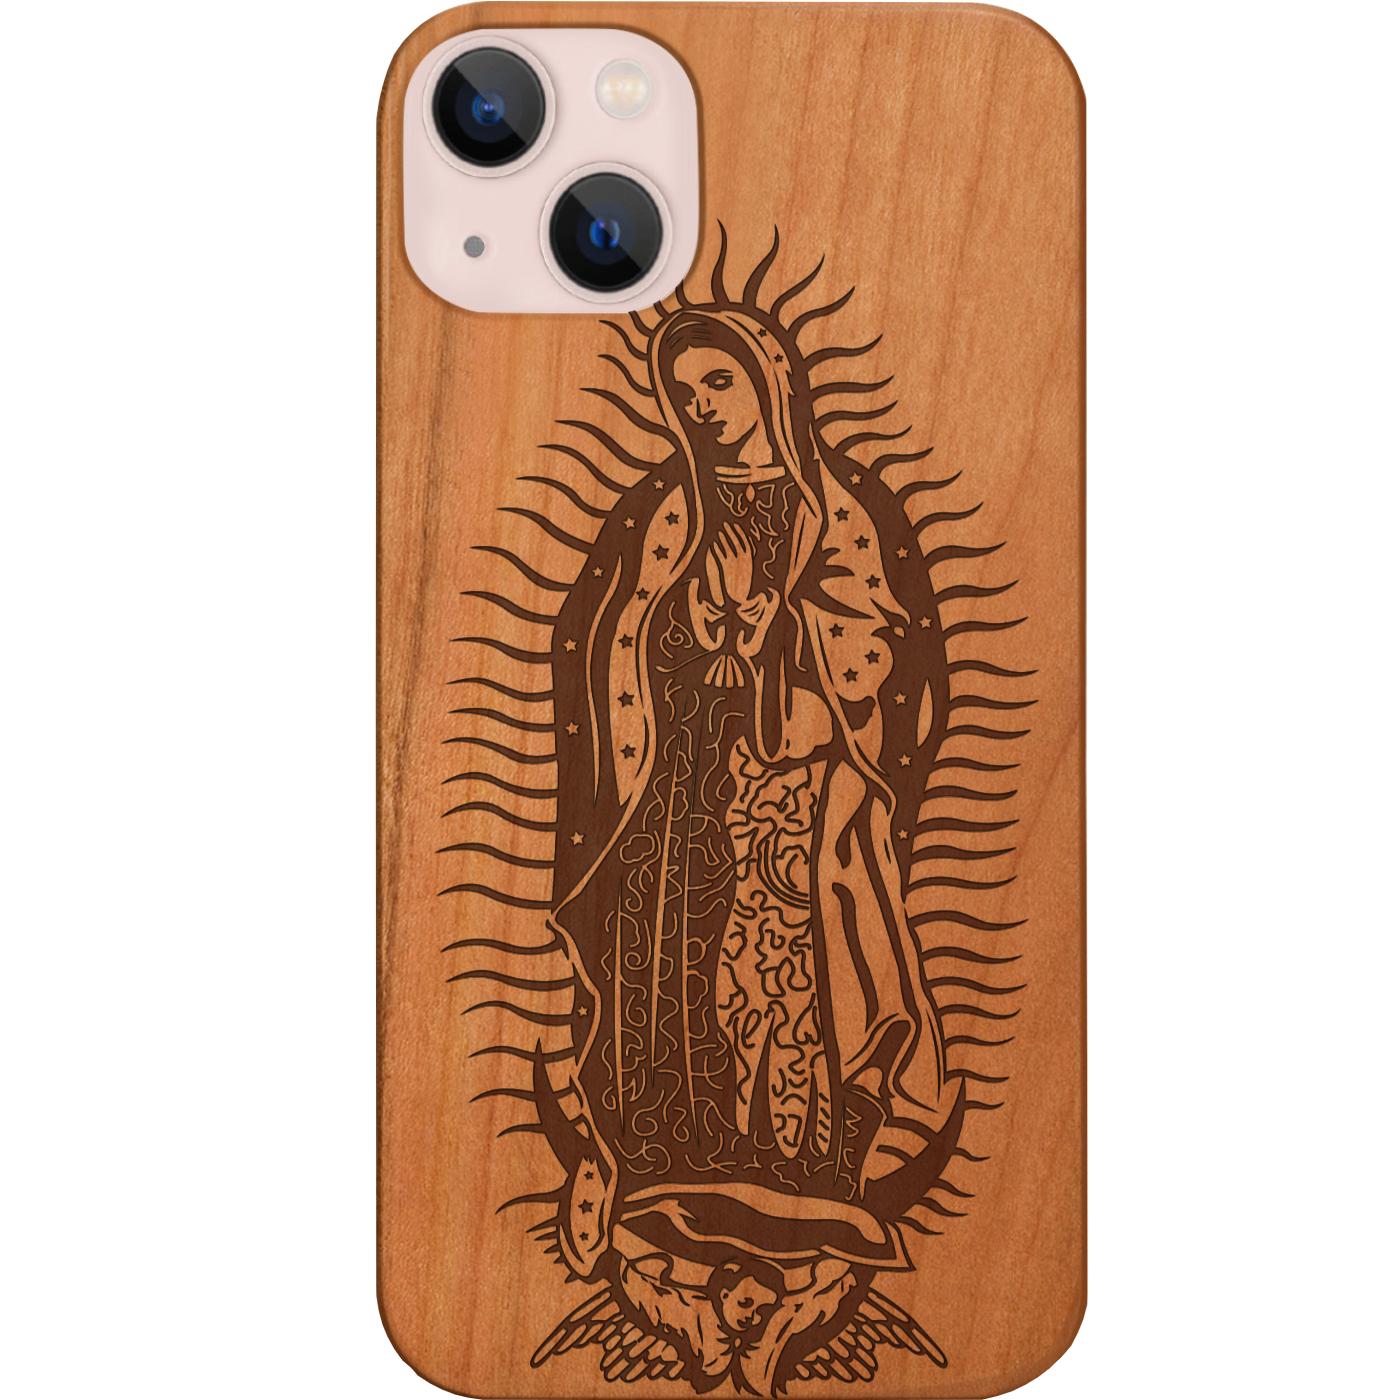 Virgen De Guadalupe - Our Lady of Guadalupe Virgin Mary Phone Case - Engraved Phone Case